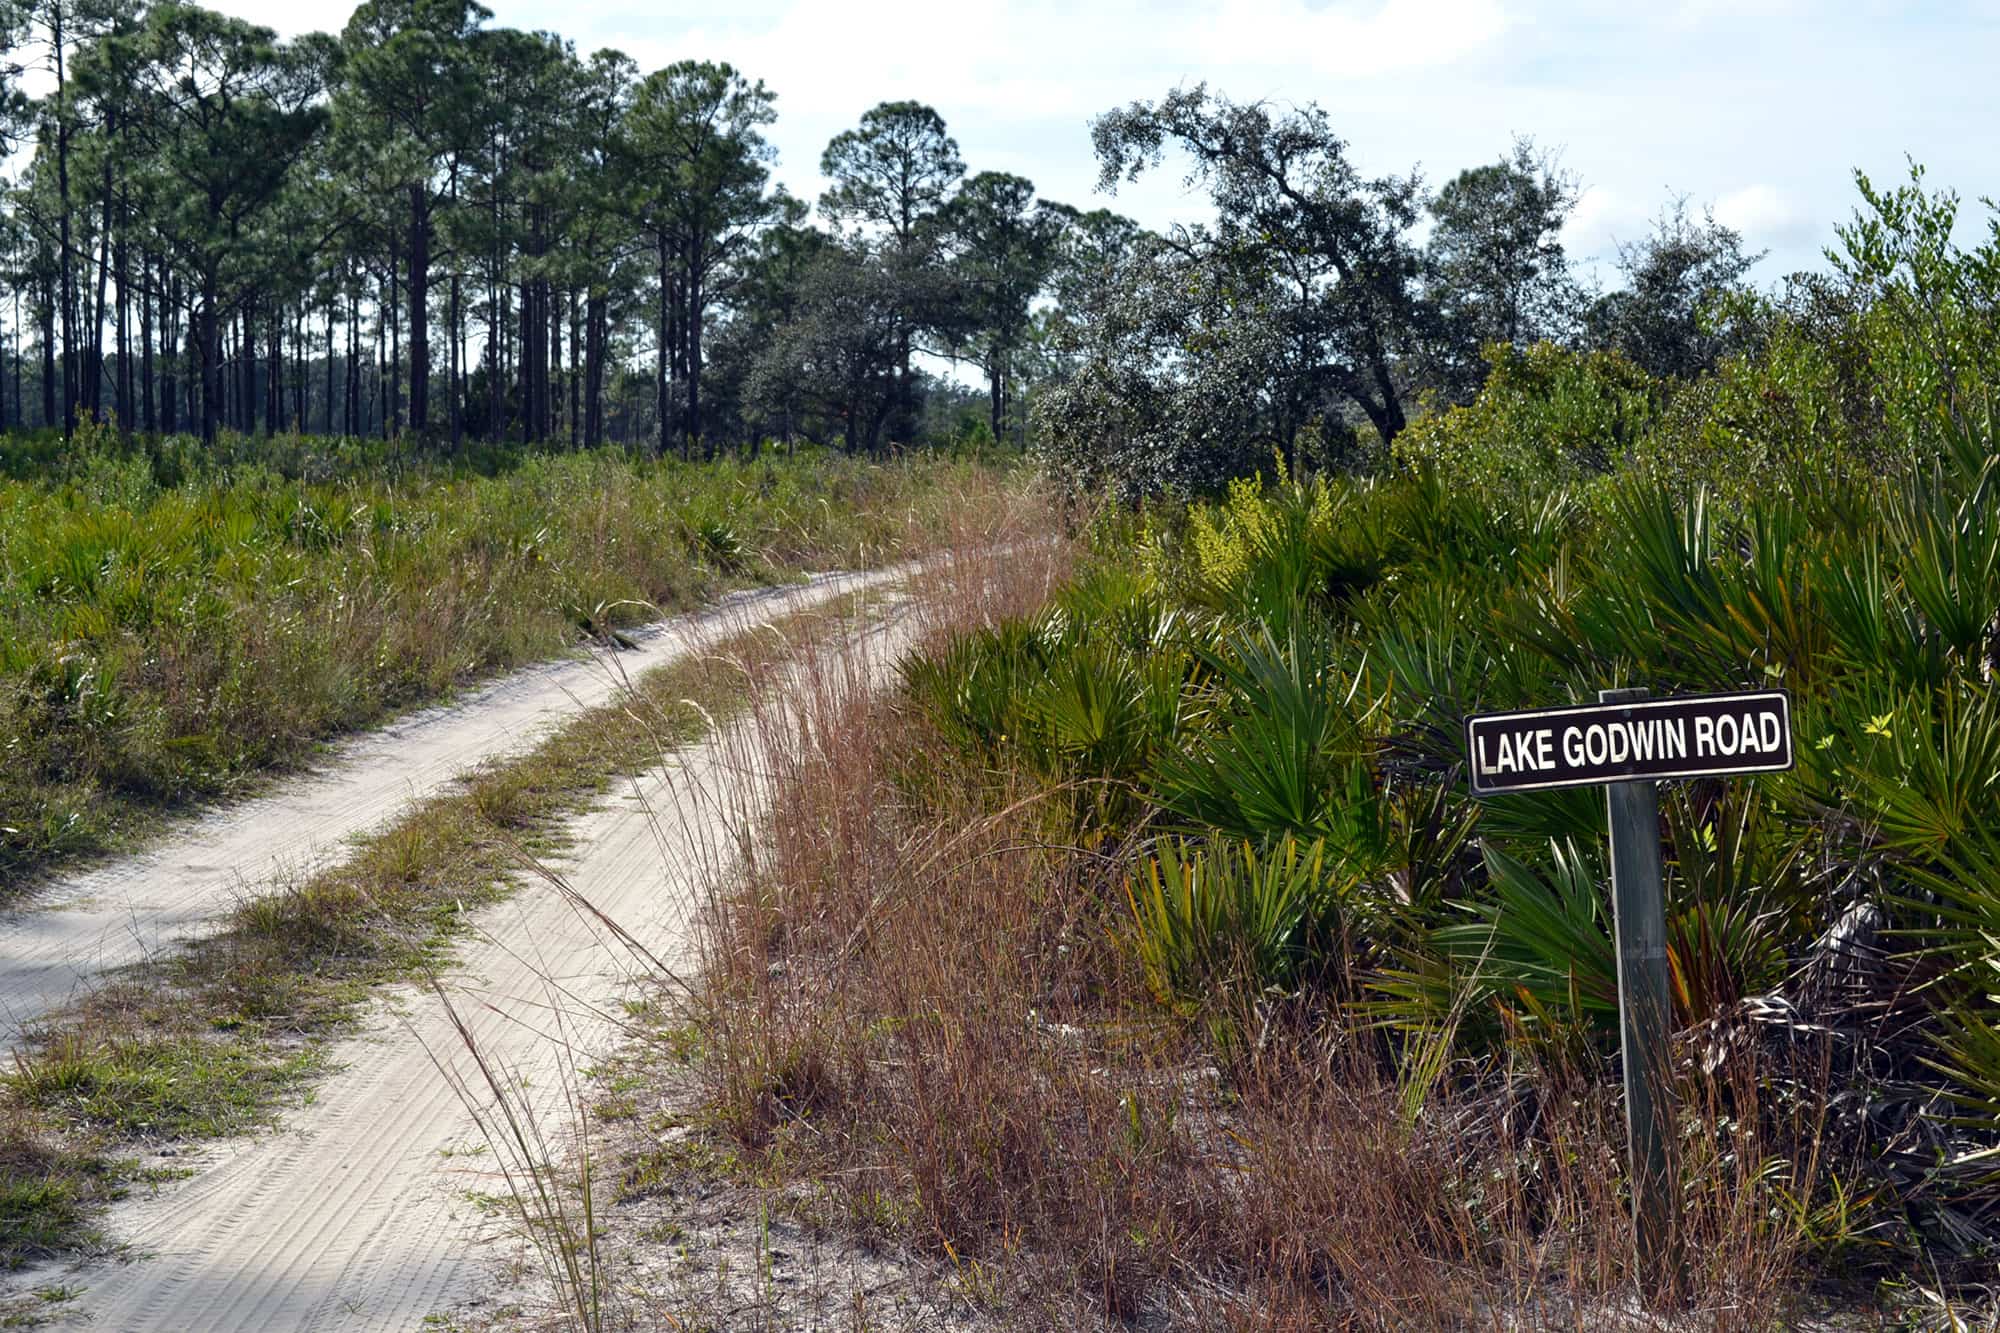 Sandy access road at Arbuckle Wildlife Management Area in Frostproof, FL